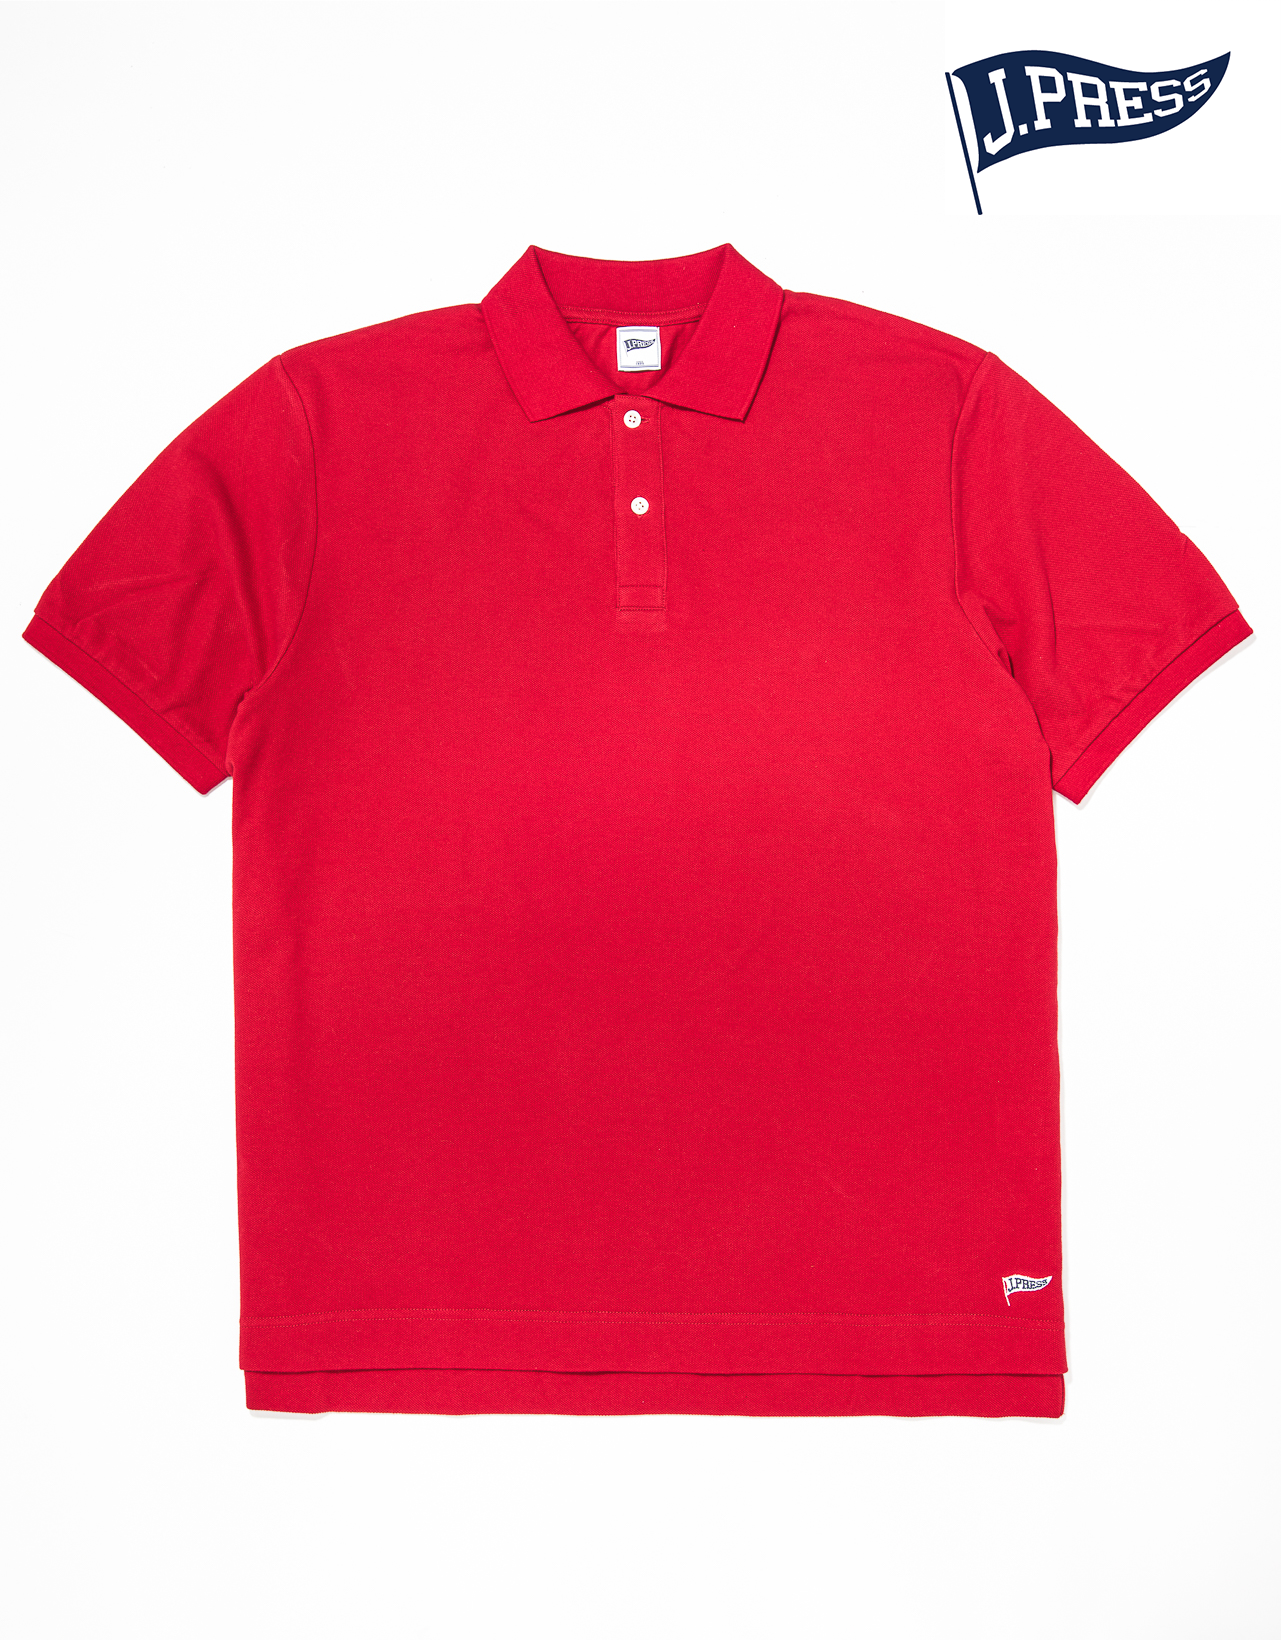 POLO SHIRT - RED